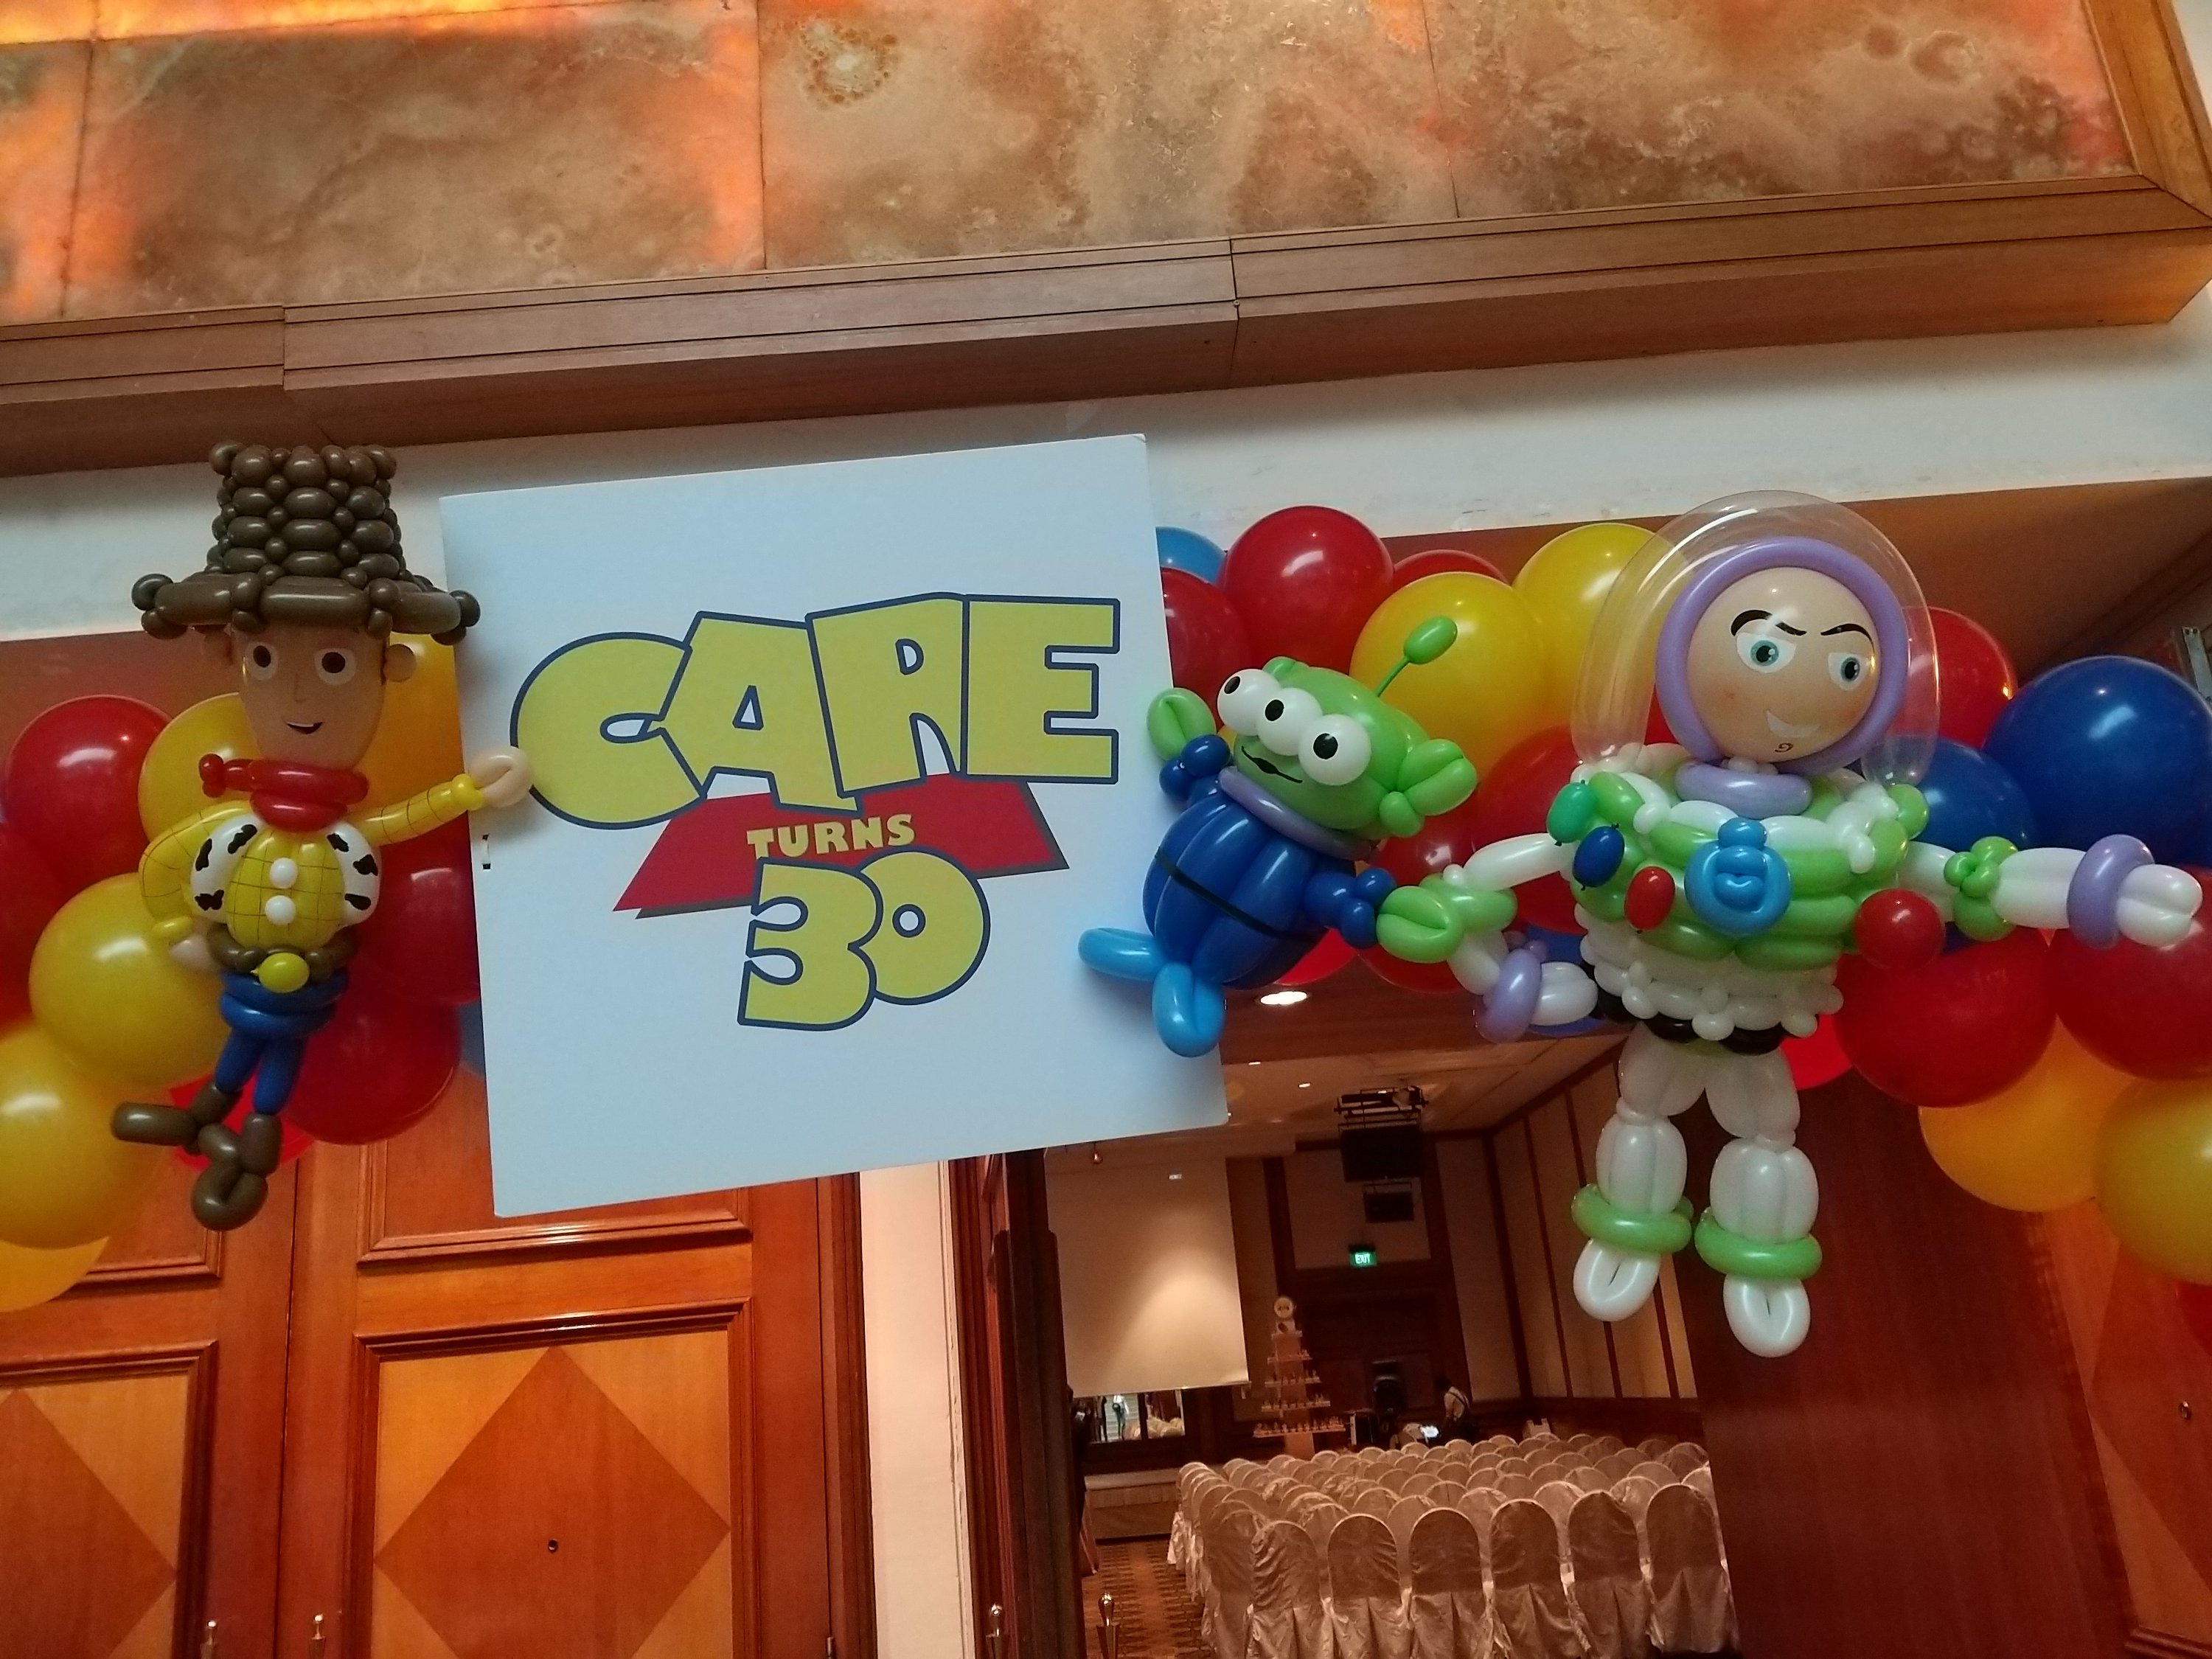 , Toy Story Themed Balloon Decorations, Singapore Balloon Decoration Services - Balloon Workshop and Balloon Sculpting